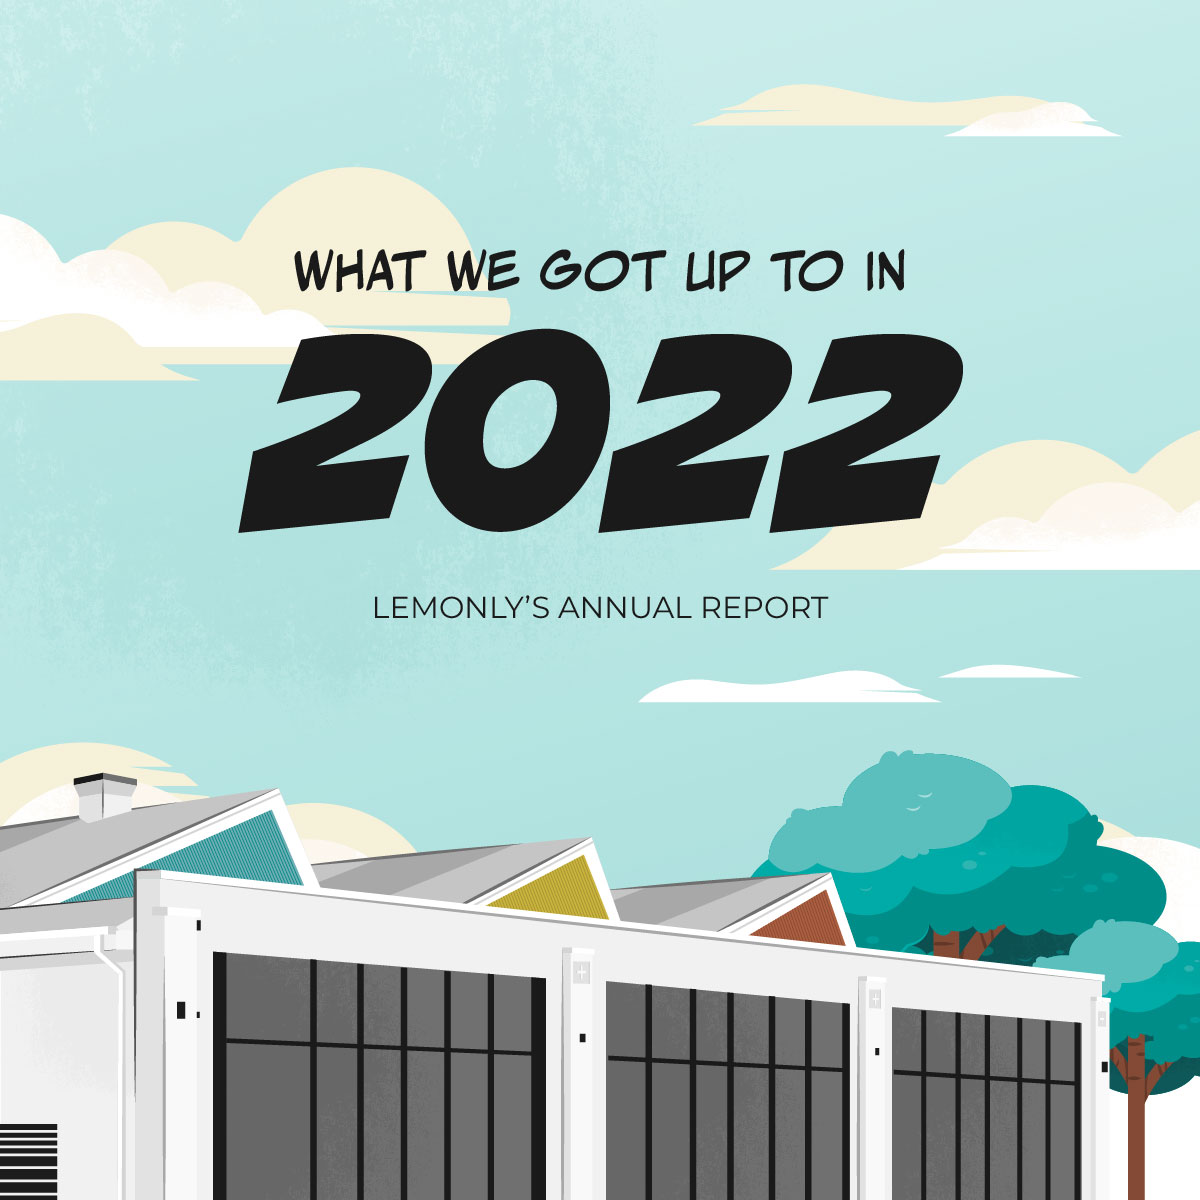 What We Got Up to in 2022: Lemonly's Annual Report